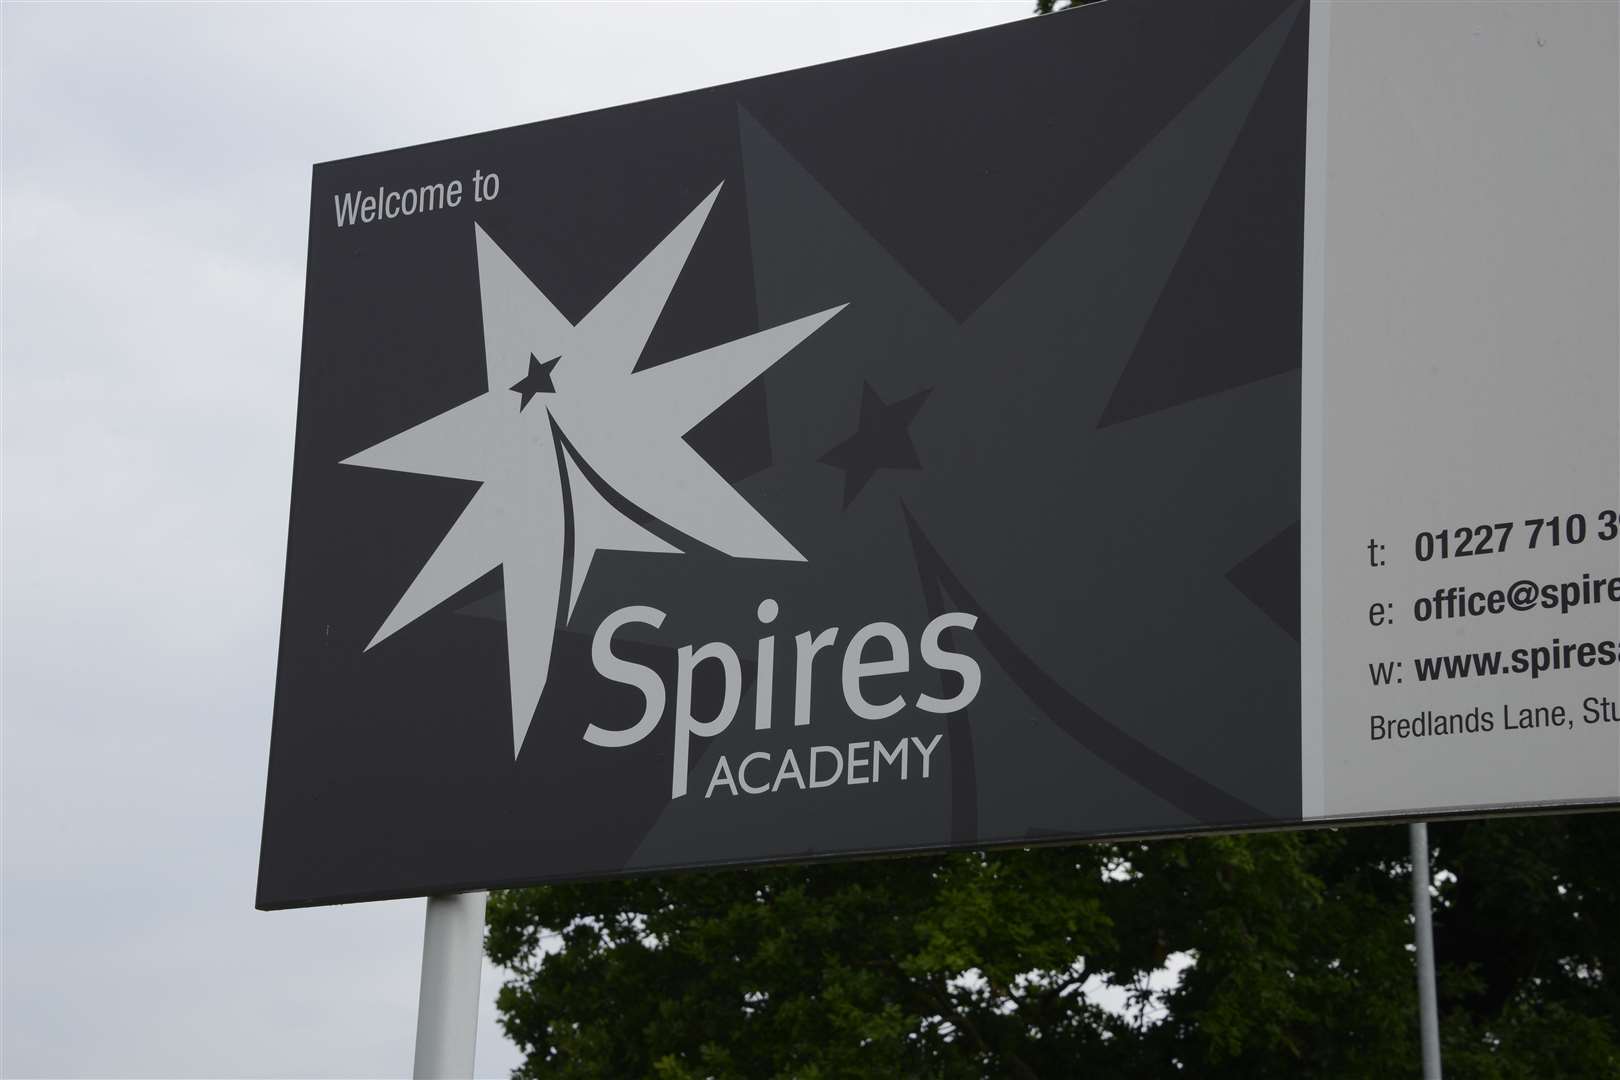 New head Anna Burden says The Spires Academy is on a "journey of transformation".